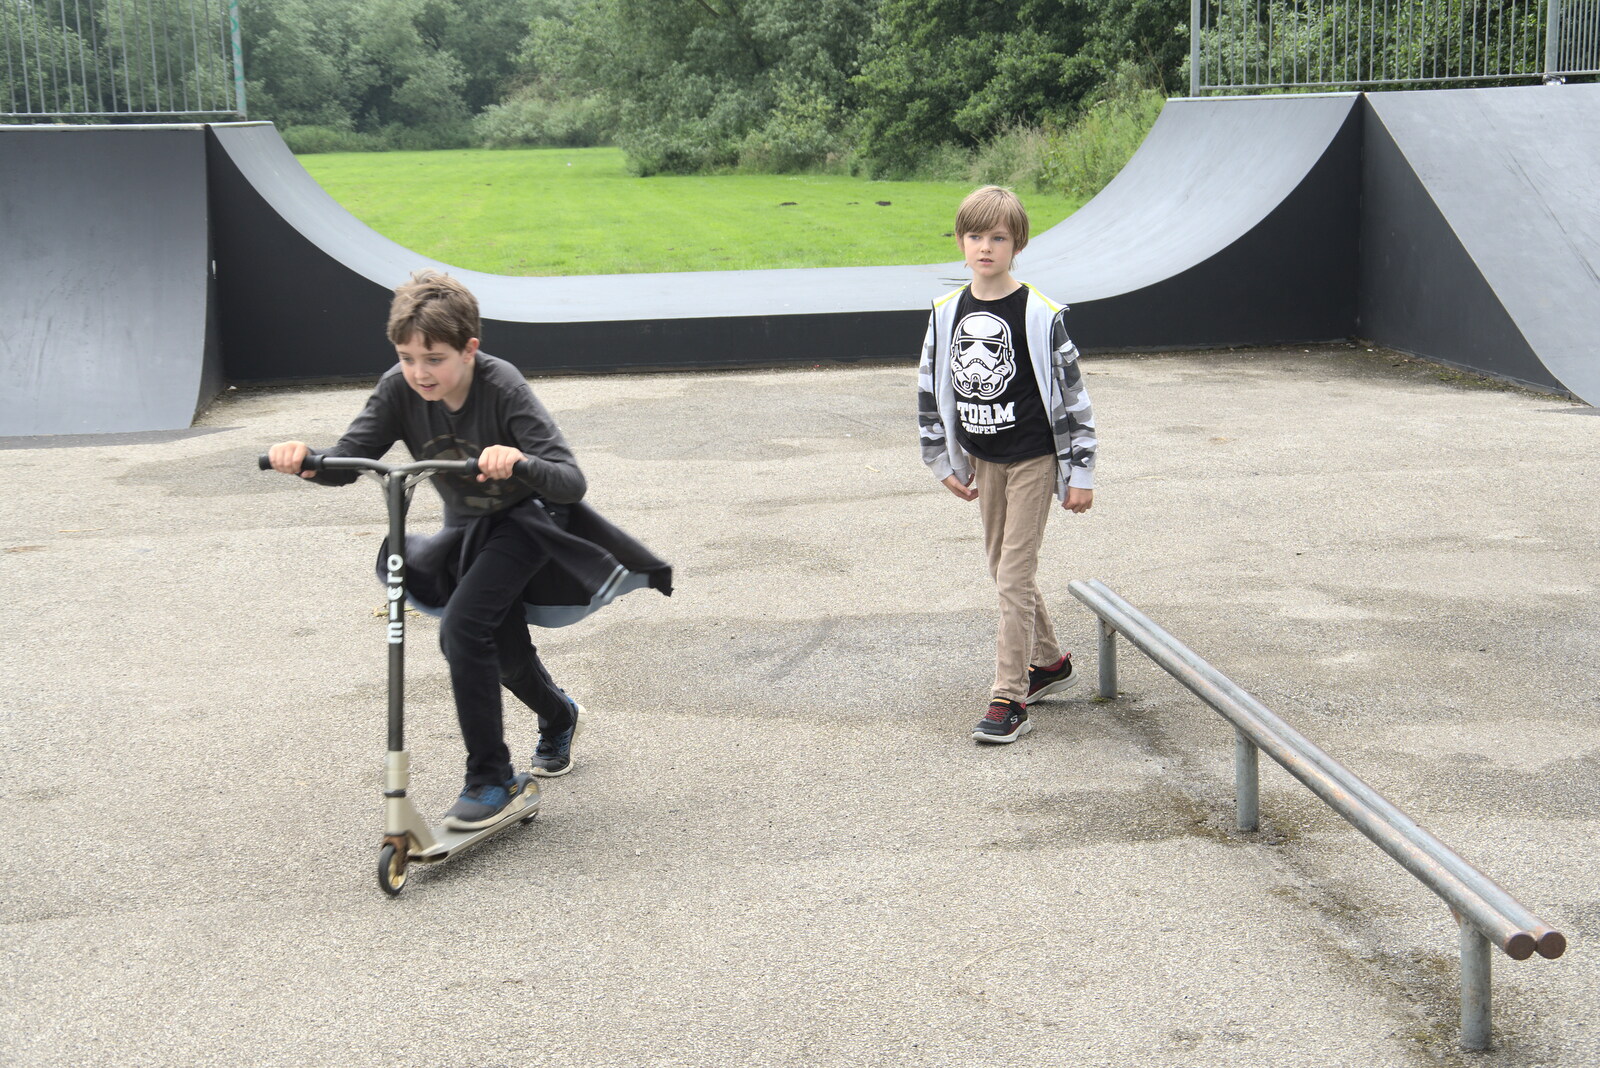 Harry walks around after a scooting Fred from New Kittens, and The Skate Park, Town Moors, Eye, Suffolk - 3rd July 2021